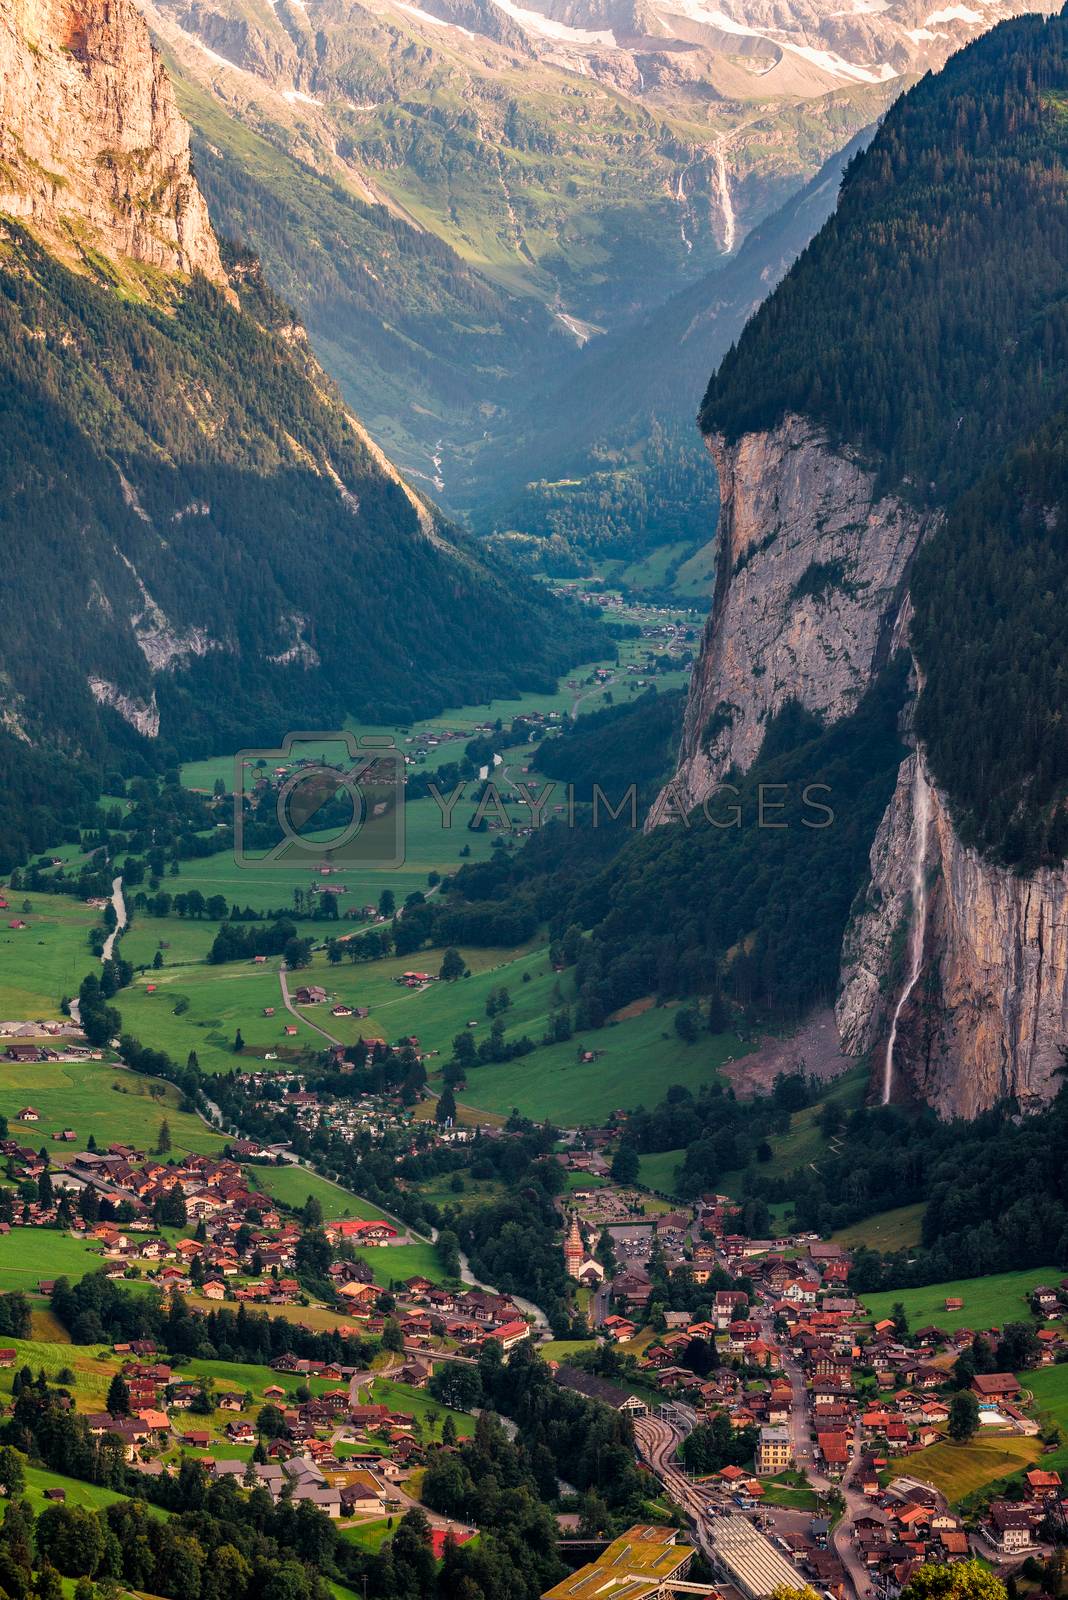 Royalty free image of Lauterbrunnen valley in the Swiss Alps with an iconic waterfall by nickfox